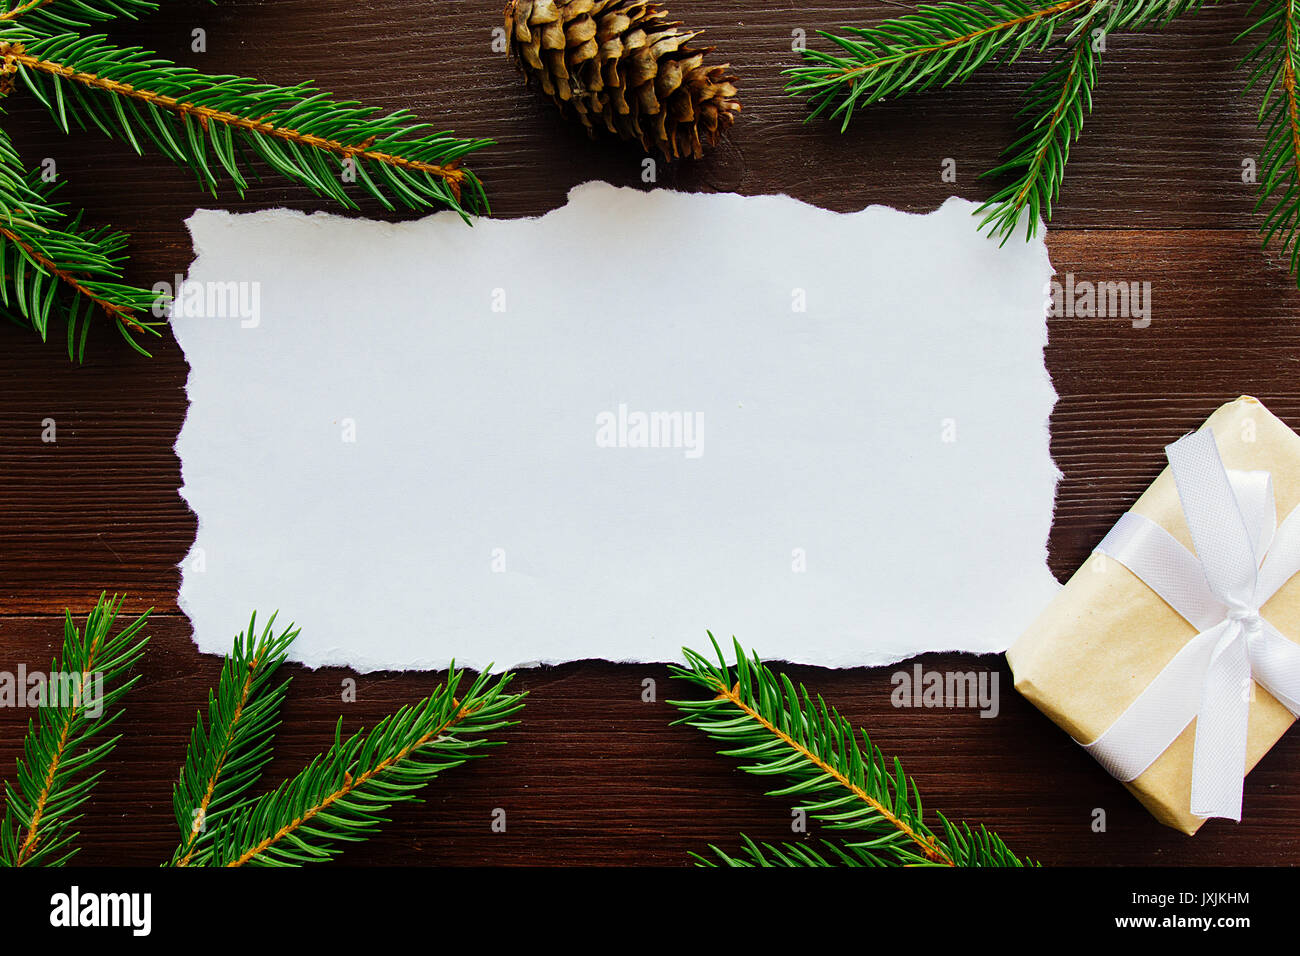 Fir branches, cones and Christmas gift copy space Stock Photo